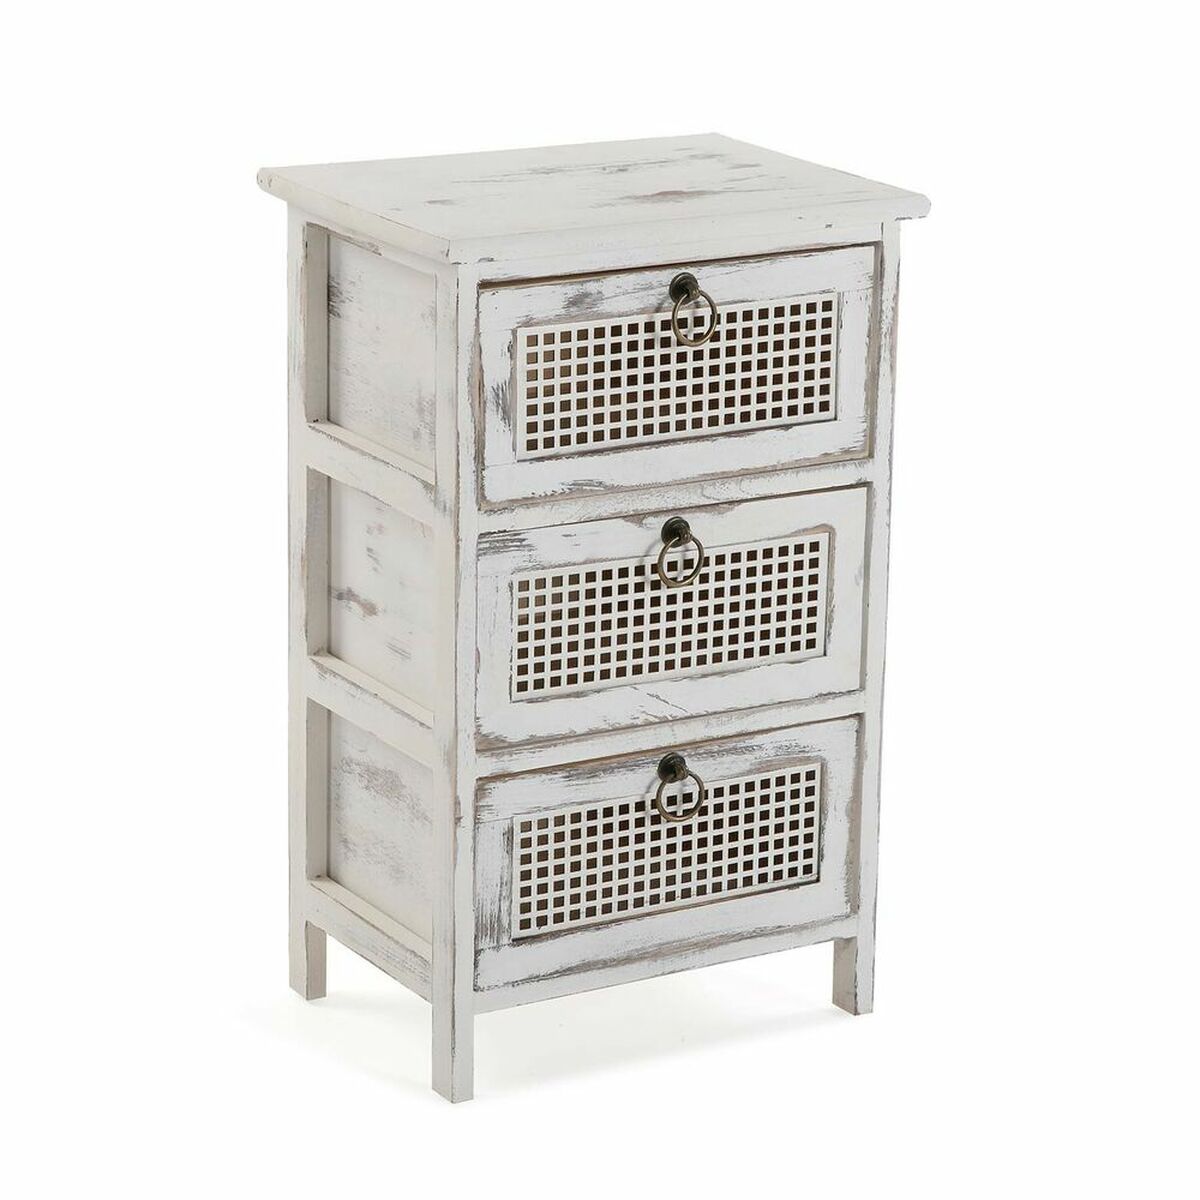 Chest of drawers Versa Old White Wood Paolownia wood Modern 27 x 59 x 37 cm